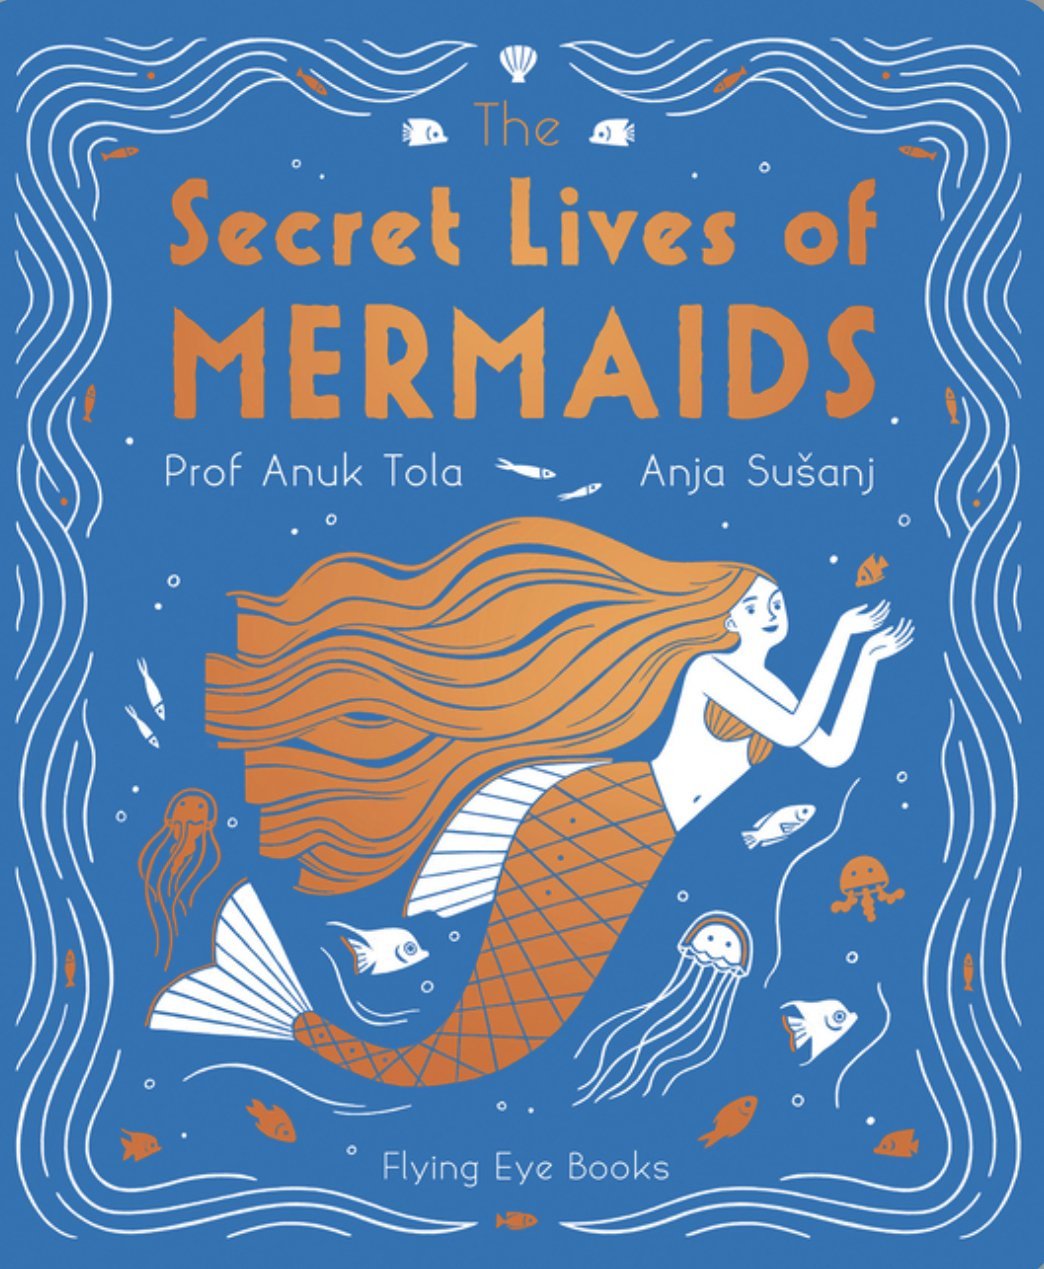 Secret Lives of Mermaids | Everything You Want to Know About Mermaids!